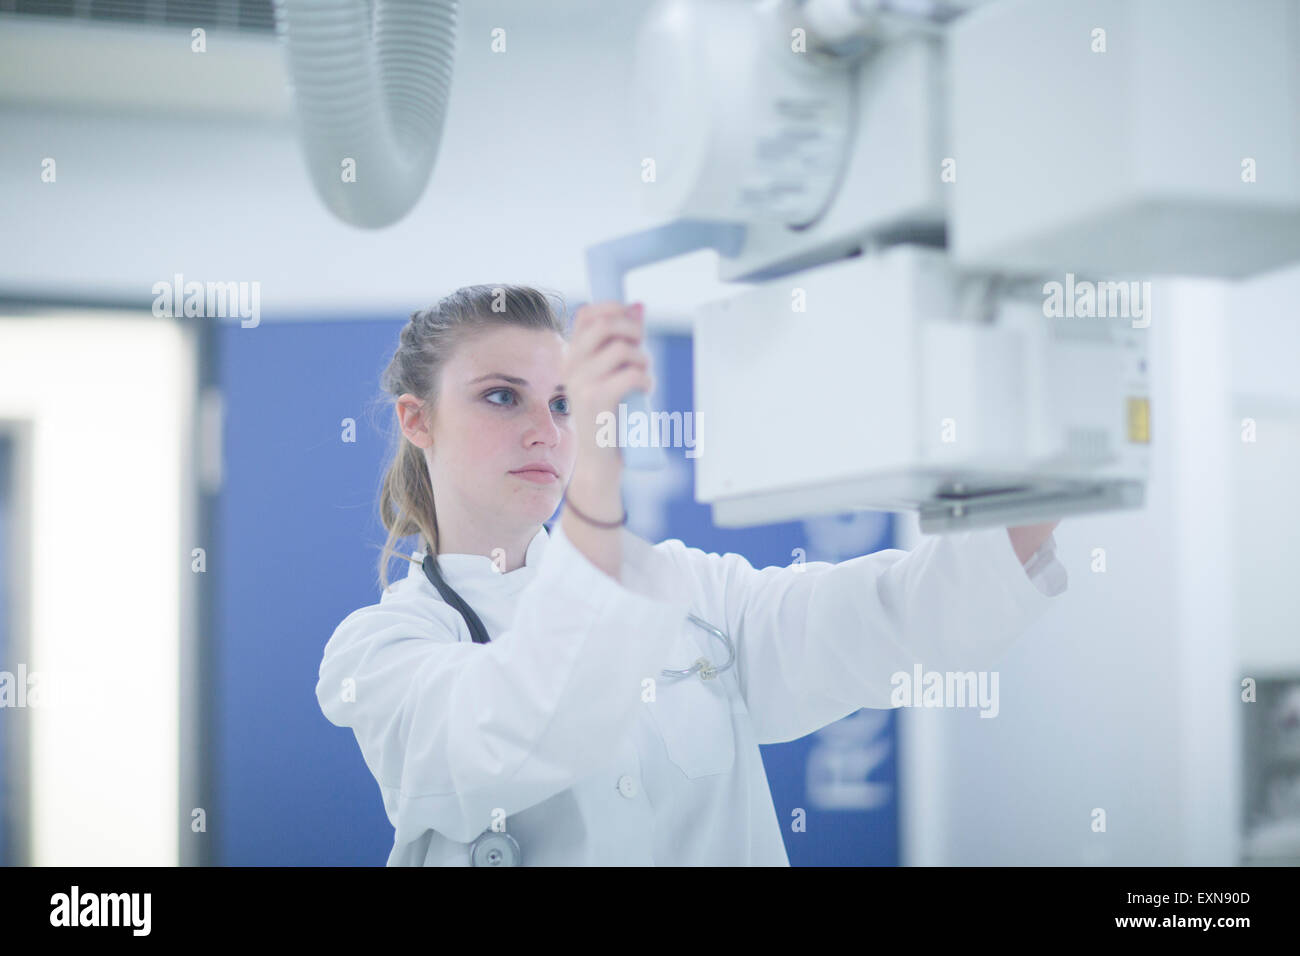 Young doctor in hospital adjusting at x-ray unit Stock Photo